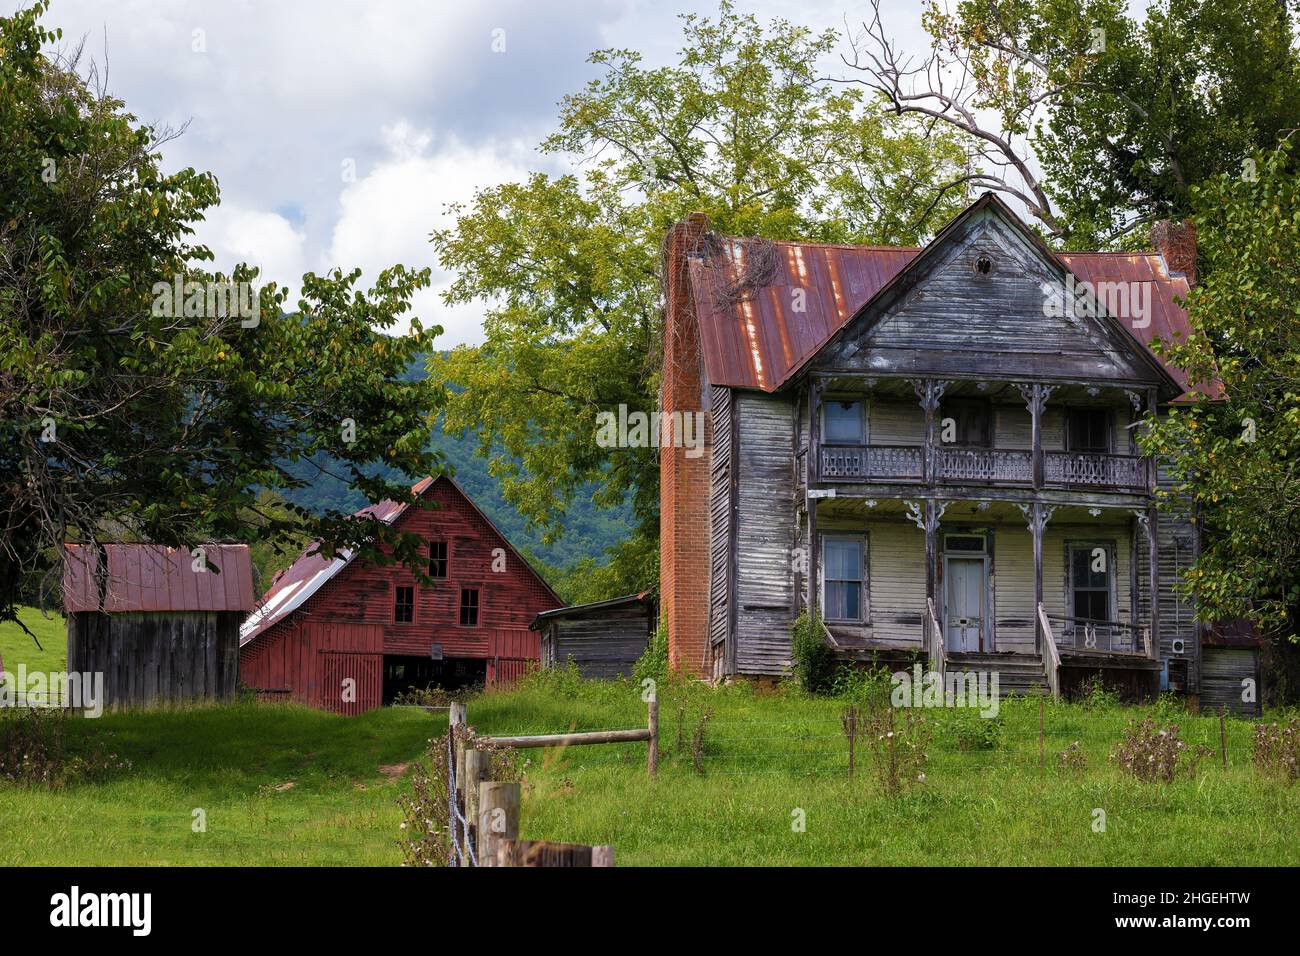 Granger County, Tennessee, USA - Autust 29, 2021: Original a log cabin build in 1848 for the James Walker family and was updated to its design today a Stock Photo